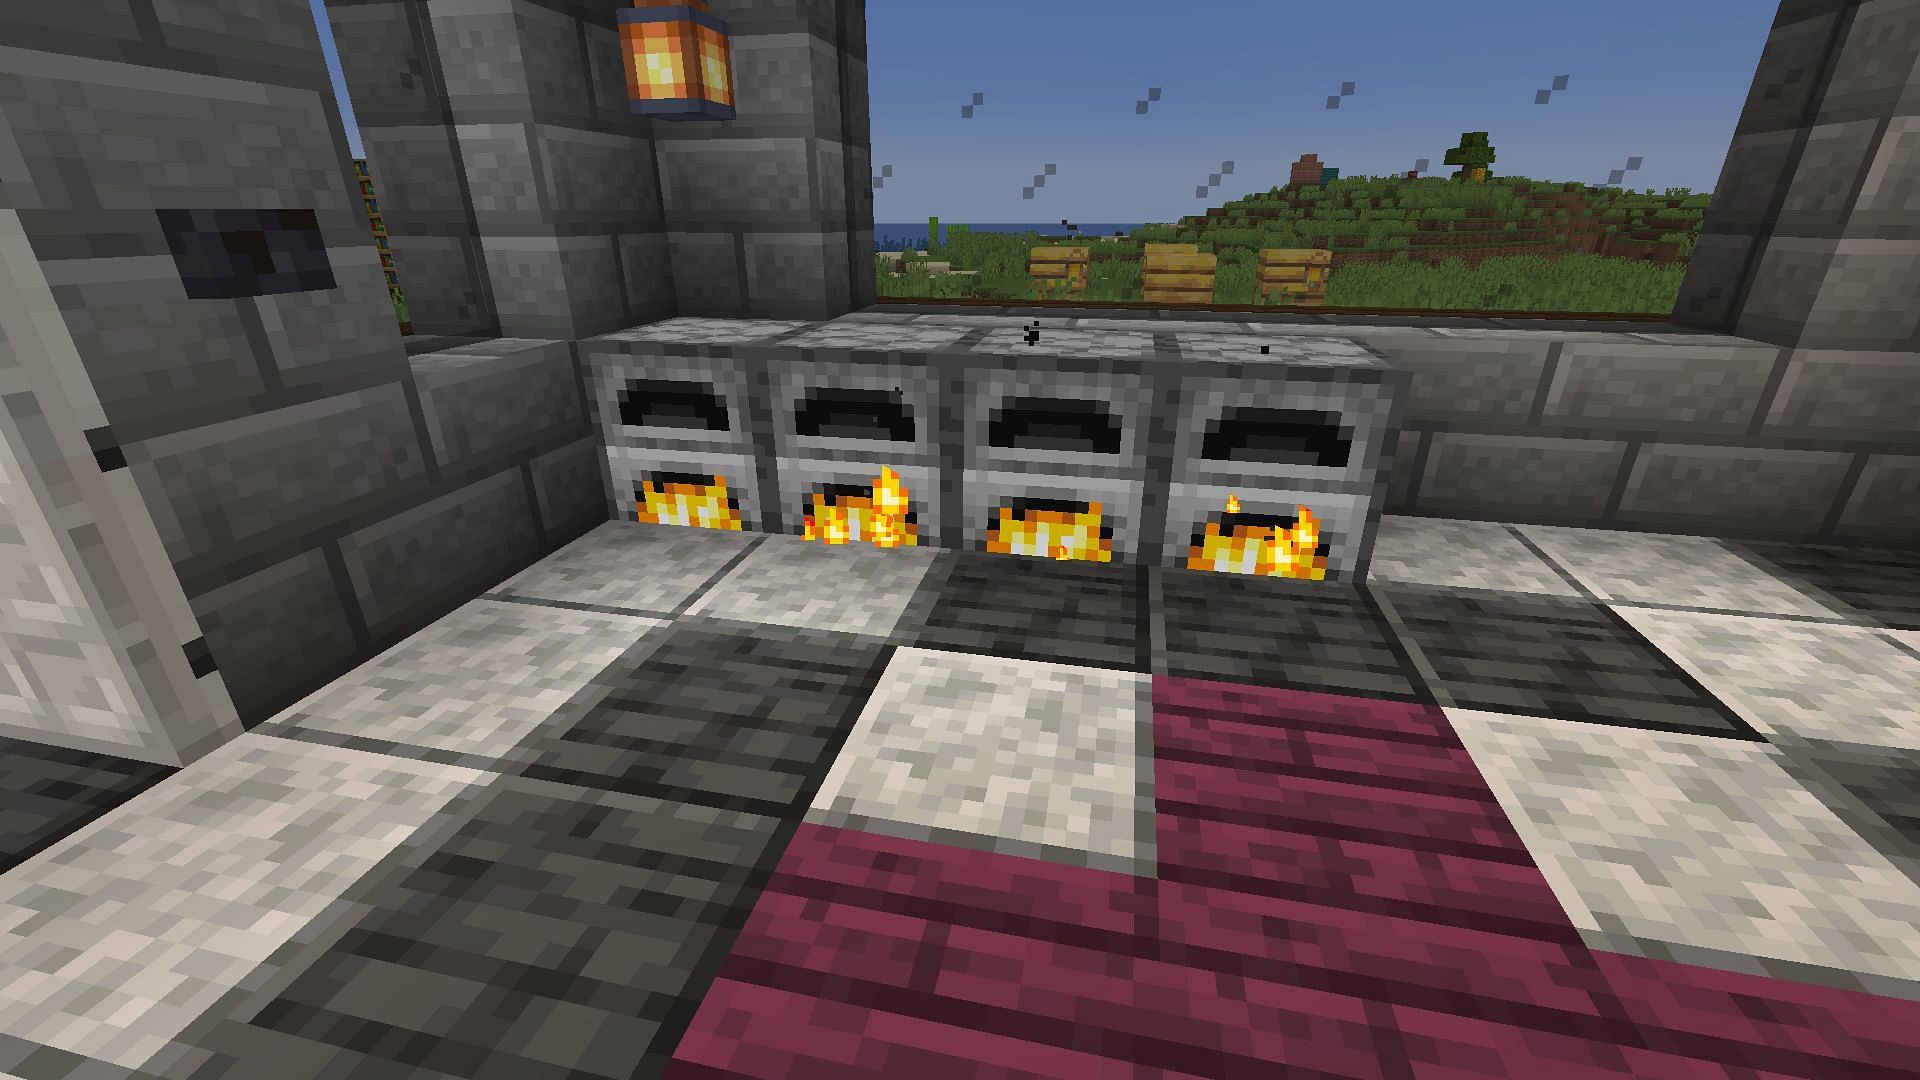 The easiest way to get regular stone is to smelt some cobble (Image via Mojang)